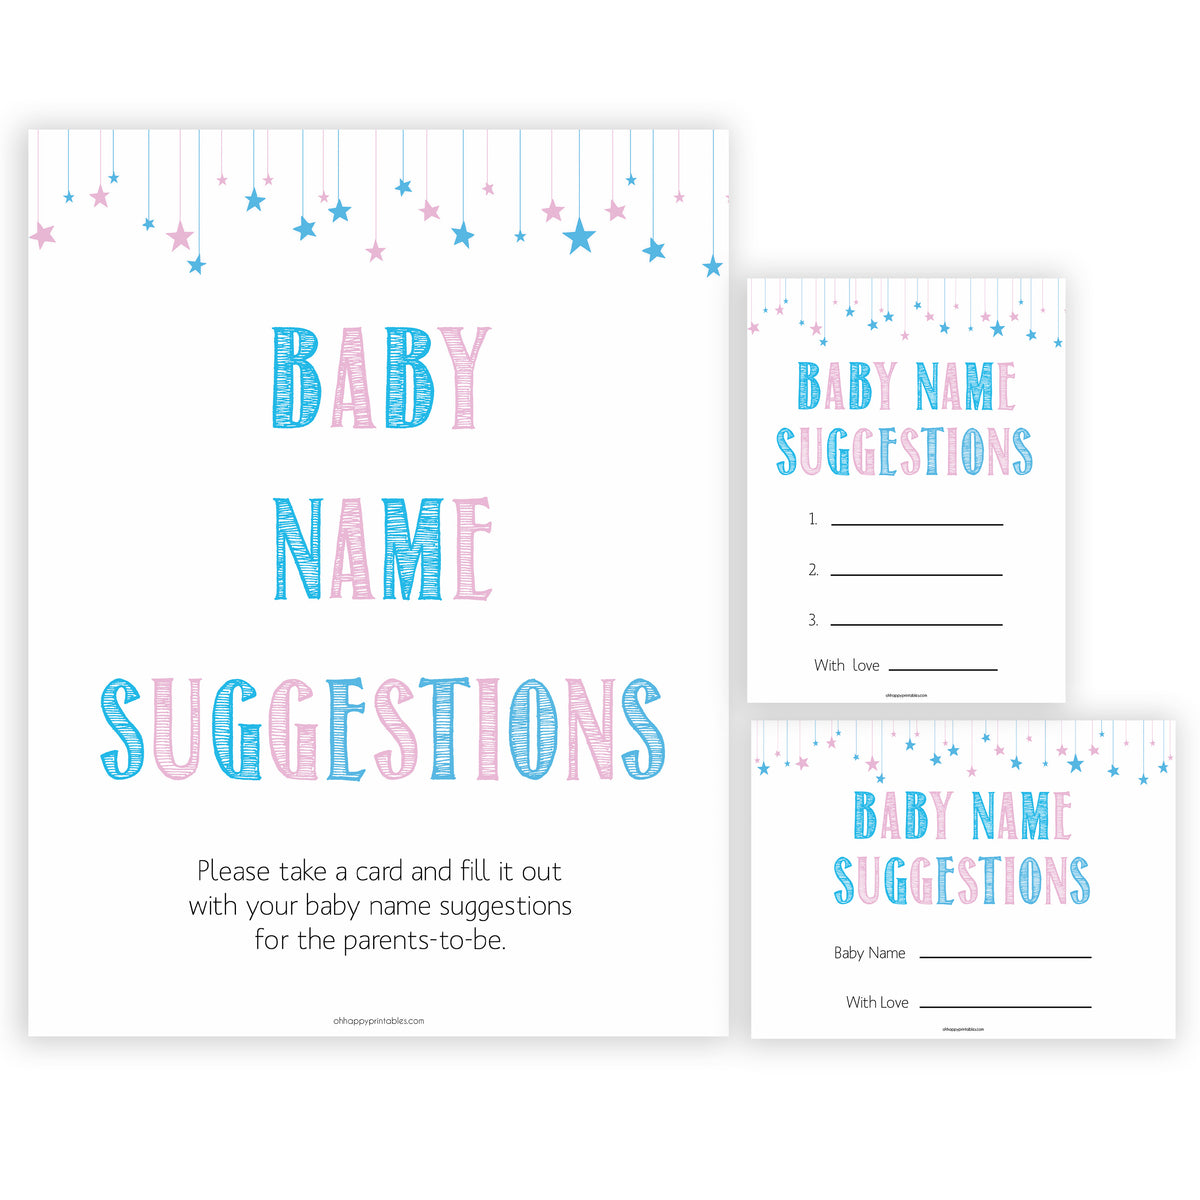 baby-name-suggestions-game-gender-reveal-printable-baby-shower-games